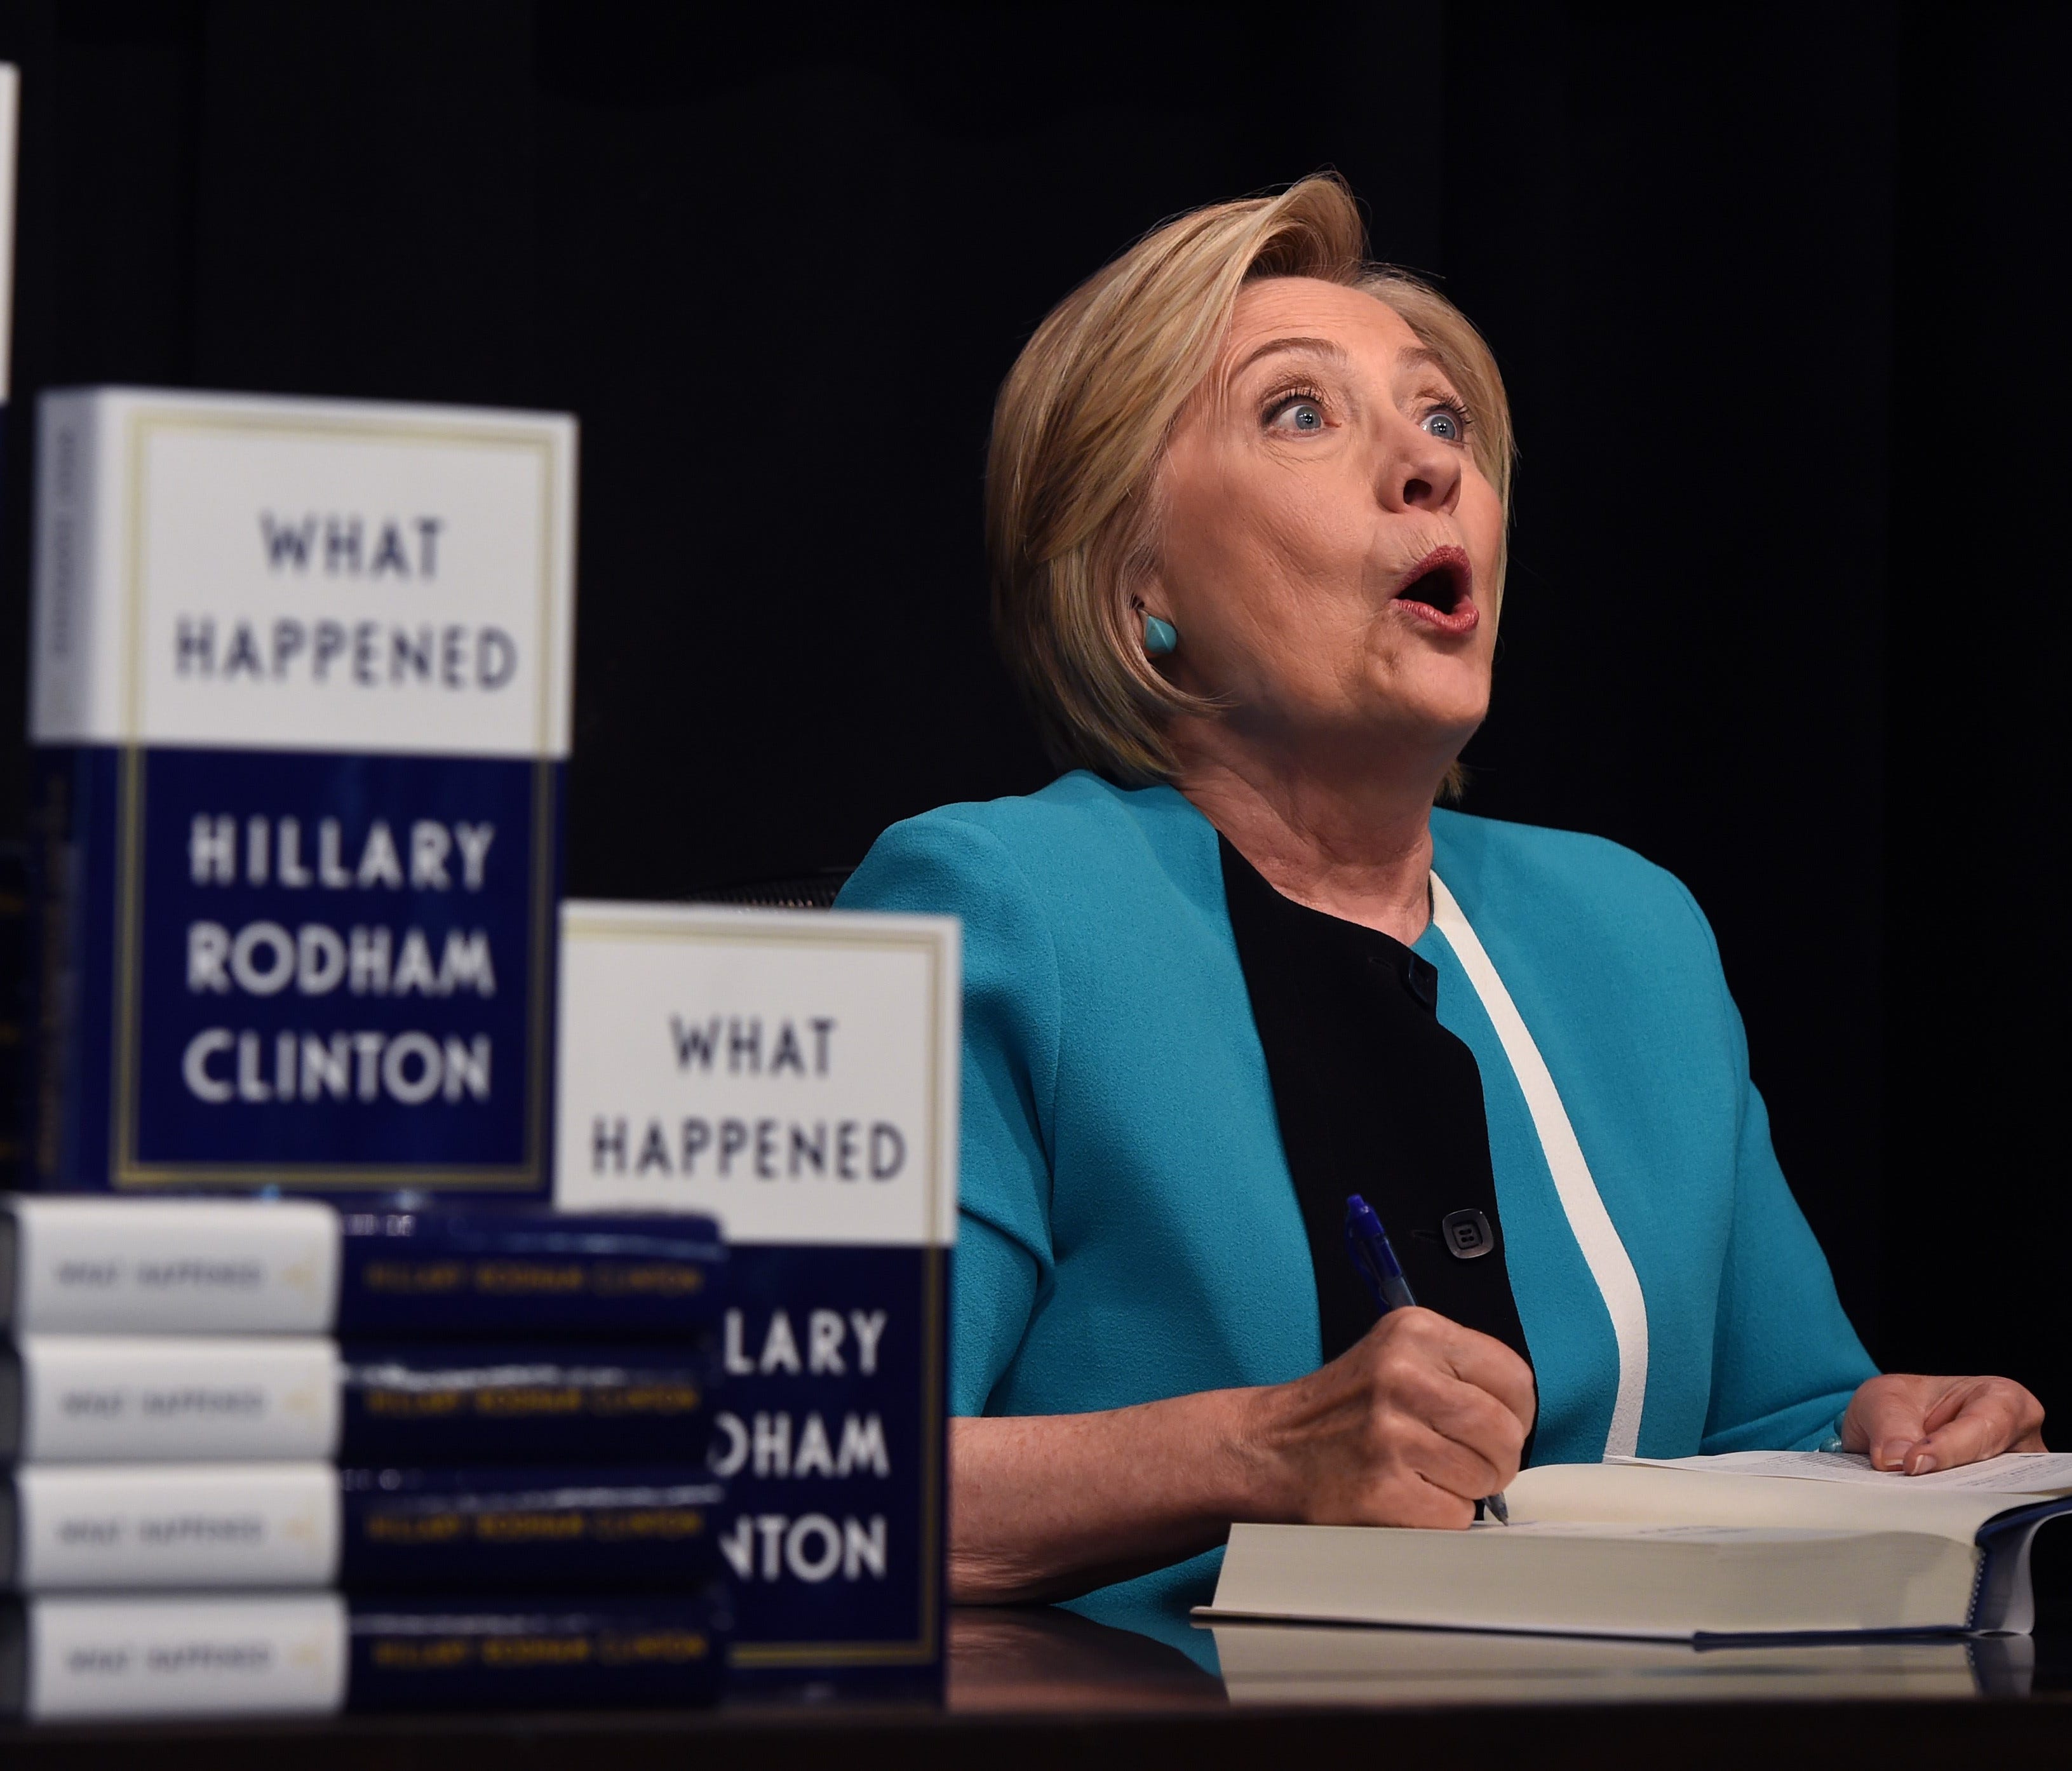 Hillary Clinton kicks off her book tour of her memoir of the 2016 presidential campaign titled 